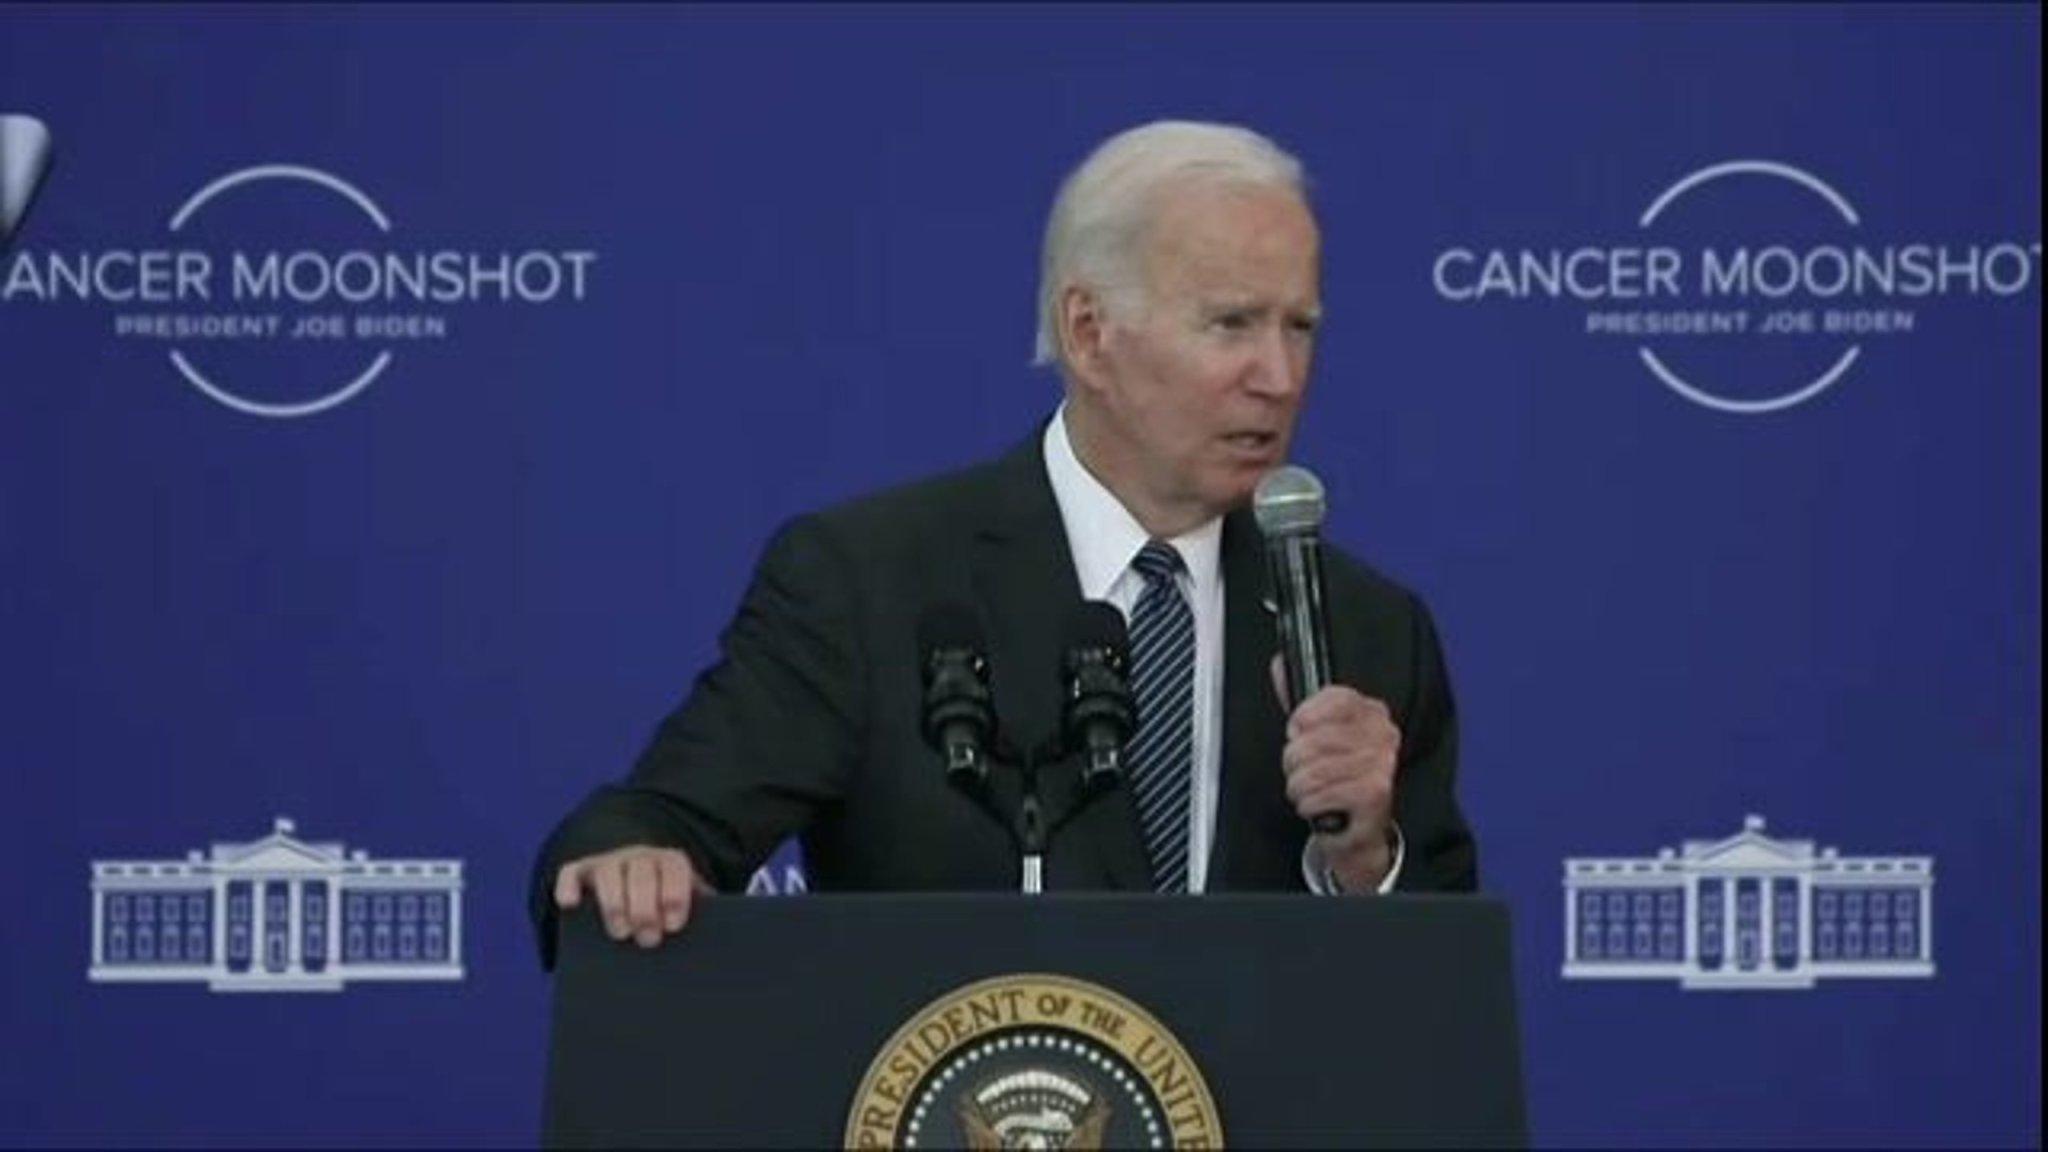 President Biden: "The goal is to cut cancer death rates by at least 50 percent ... in the next 25 years."